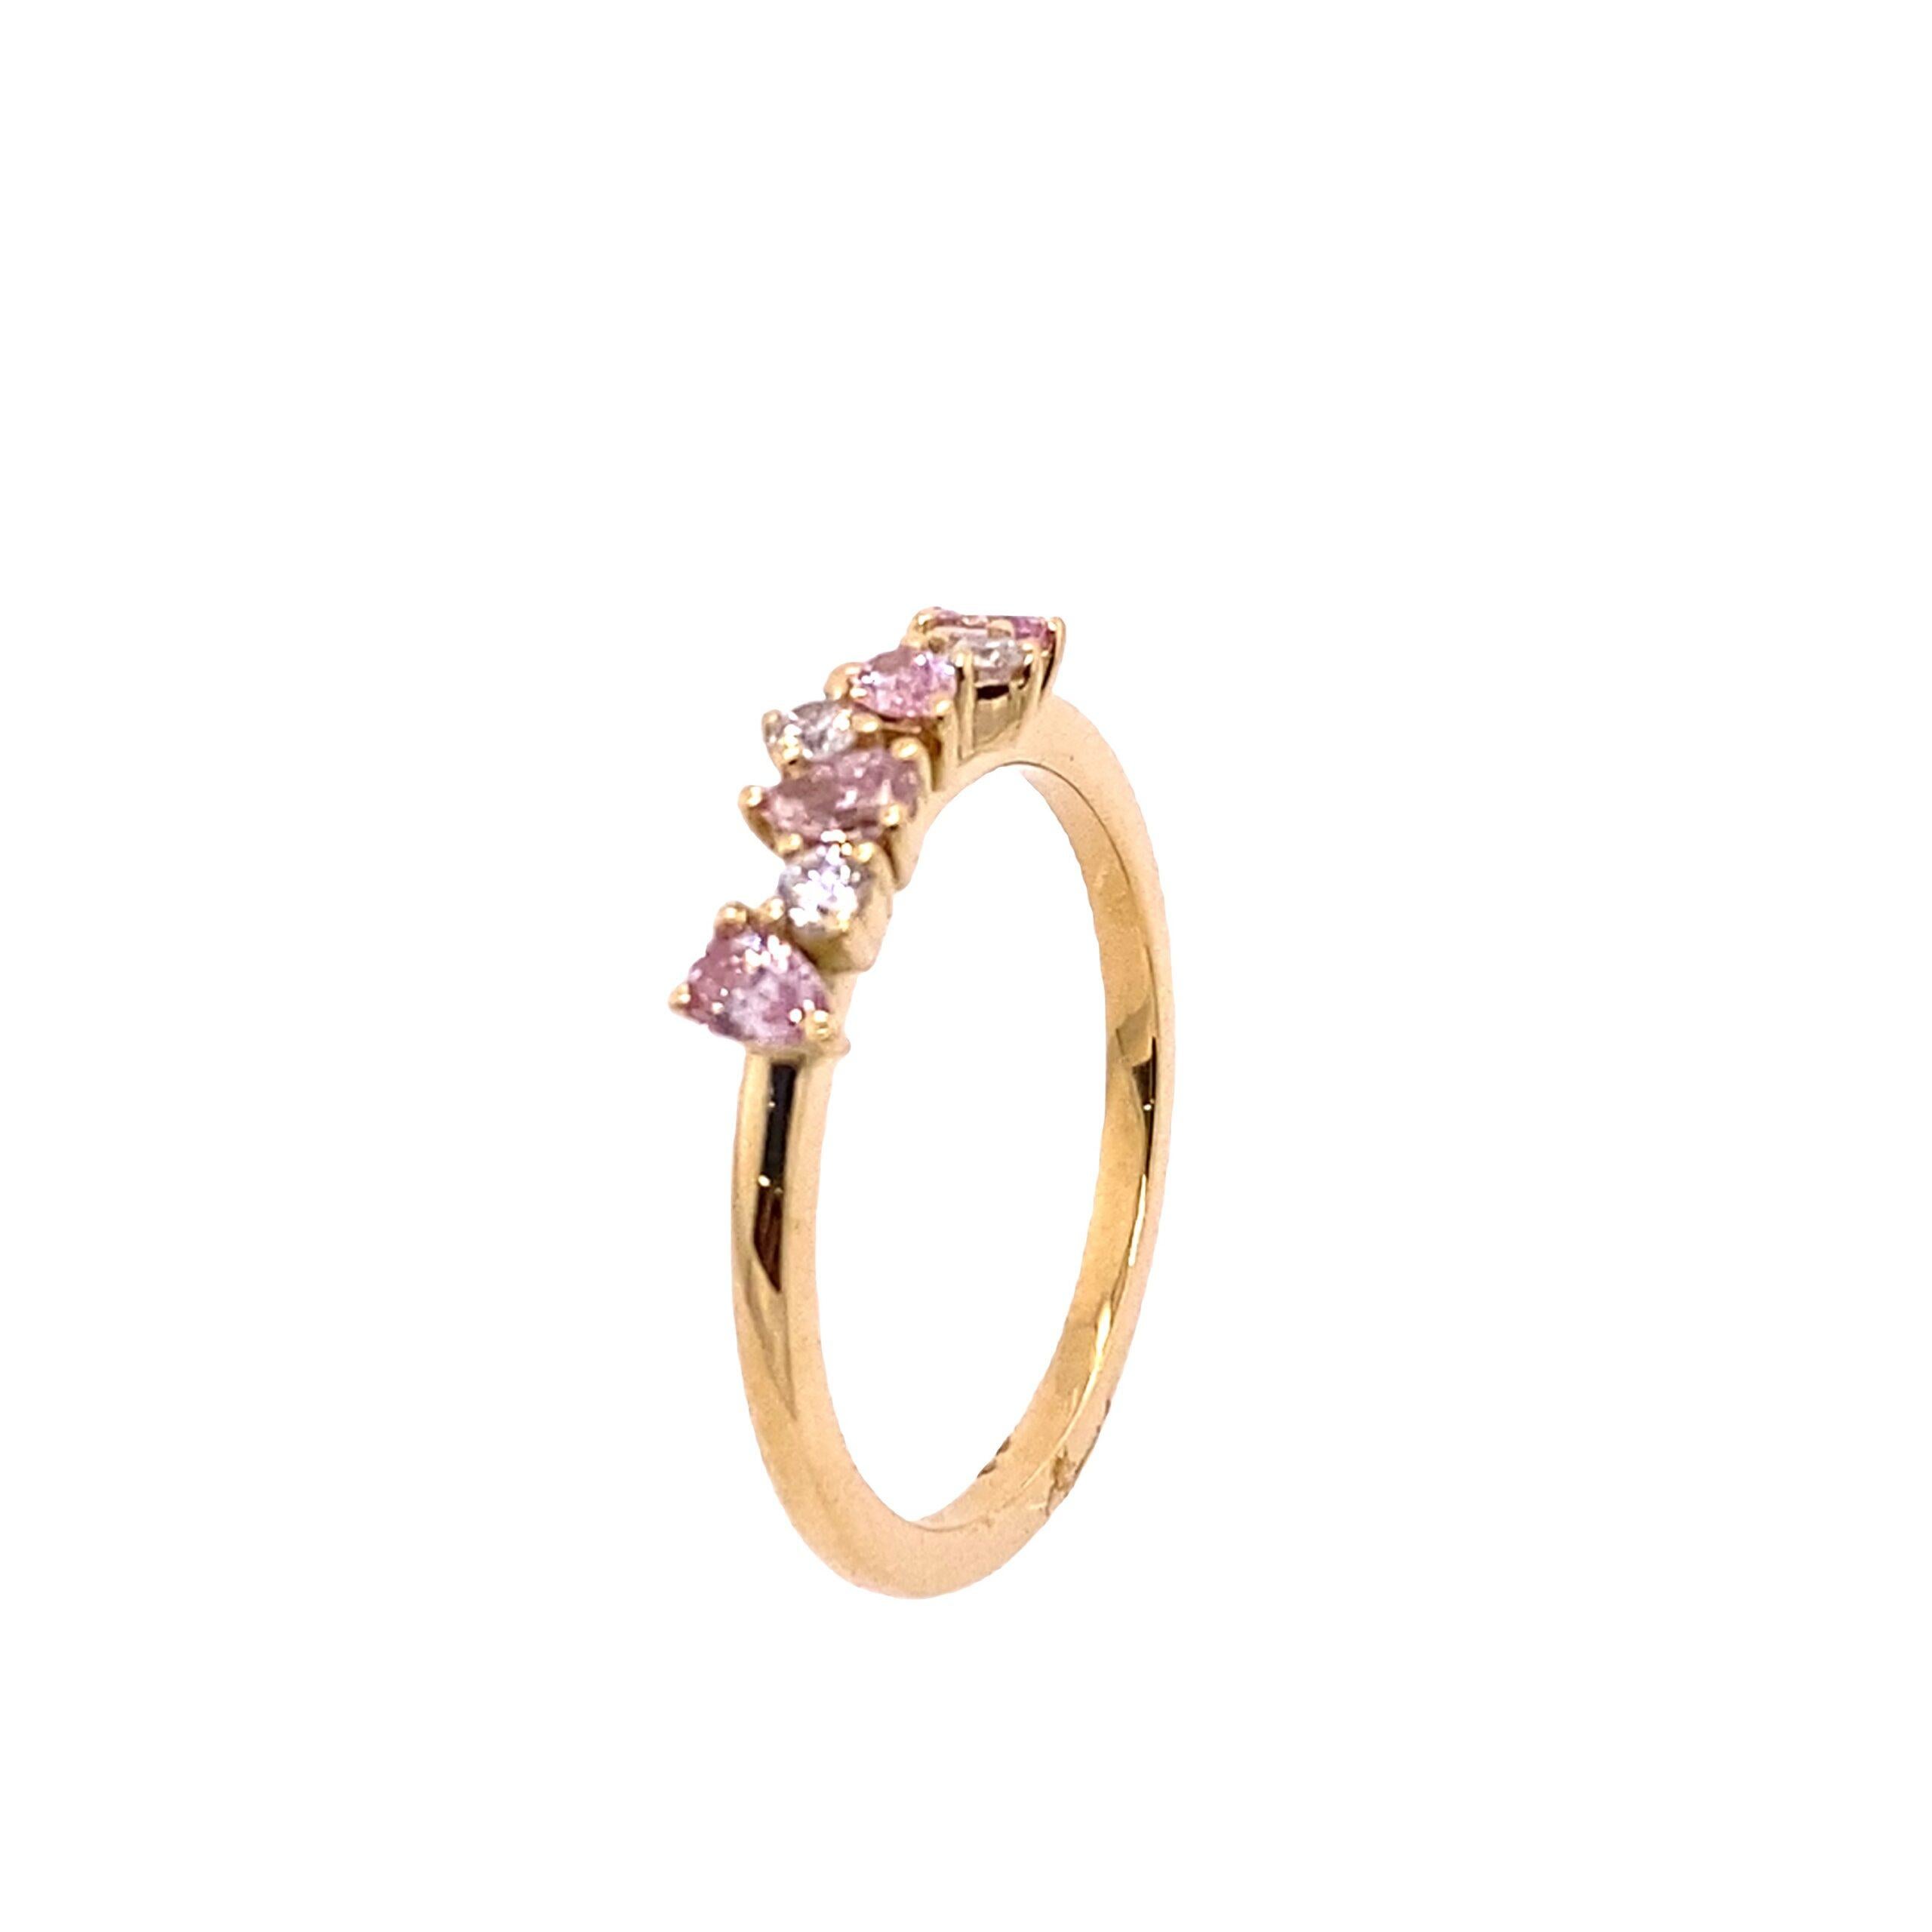 This magnificent natural intense pink pear shape and 3 round brilliant cut diamond ring is a simply gorgeous ring set in 18ct yellow gold.

Additional Information:
Total Diamond Weight: 0.43ct (0.32ct pink pear shape + 0.11ct round diamonds)
Diamond